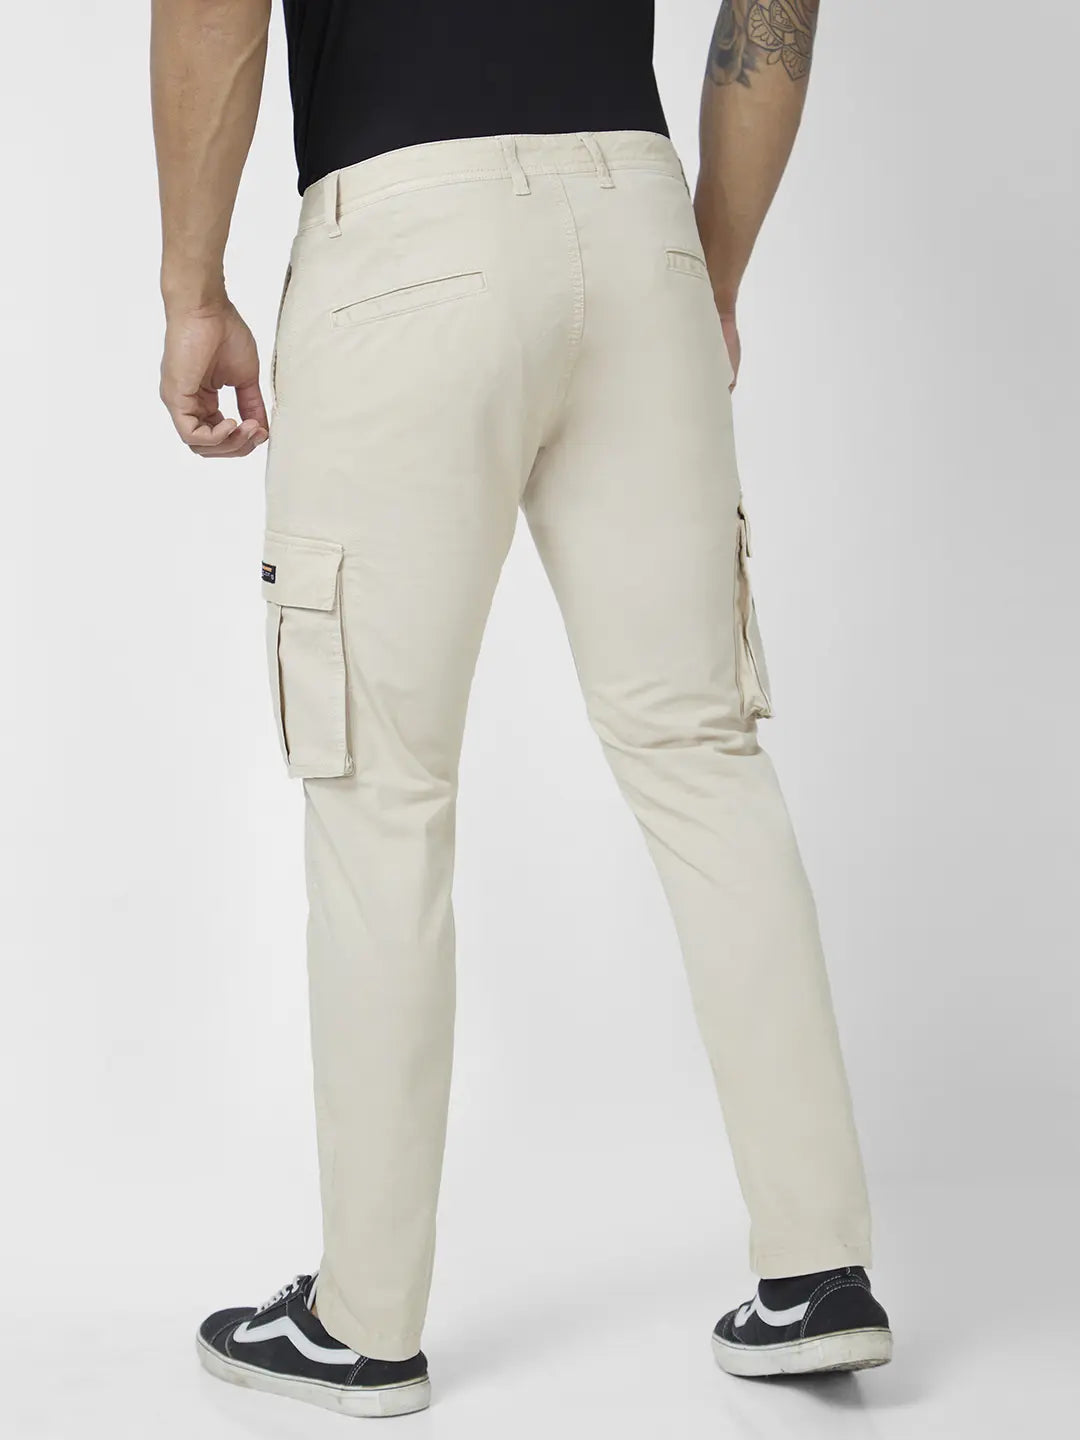 HDE Women's High Waisted Faux Leather Cargo Pants with Pockets Cream White  33 - Walmart.com